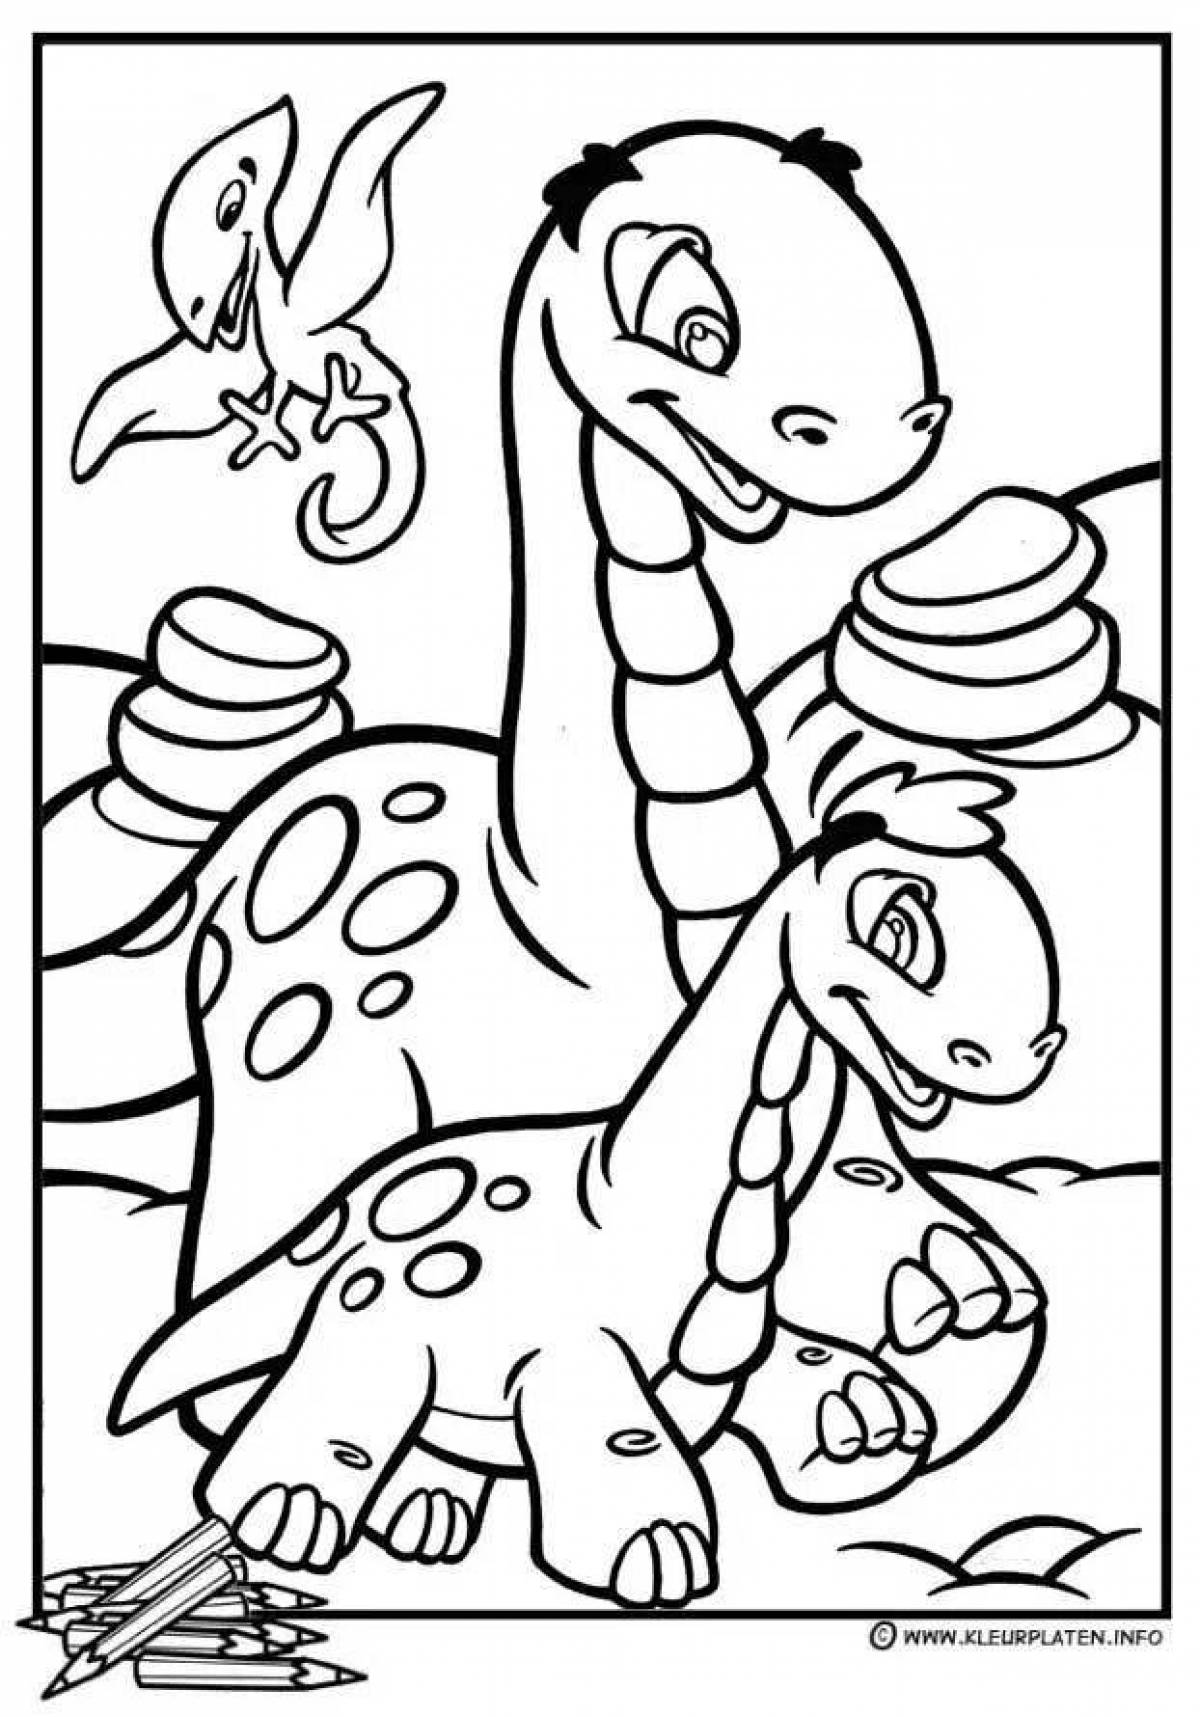 Colorful dino coloring page